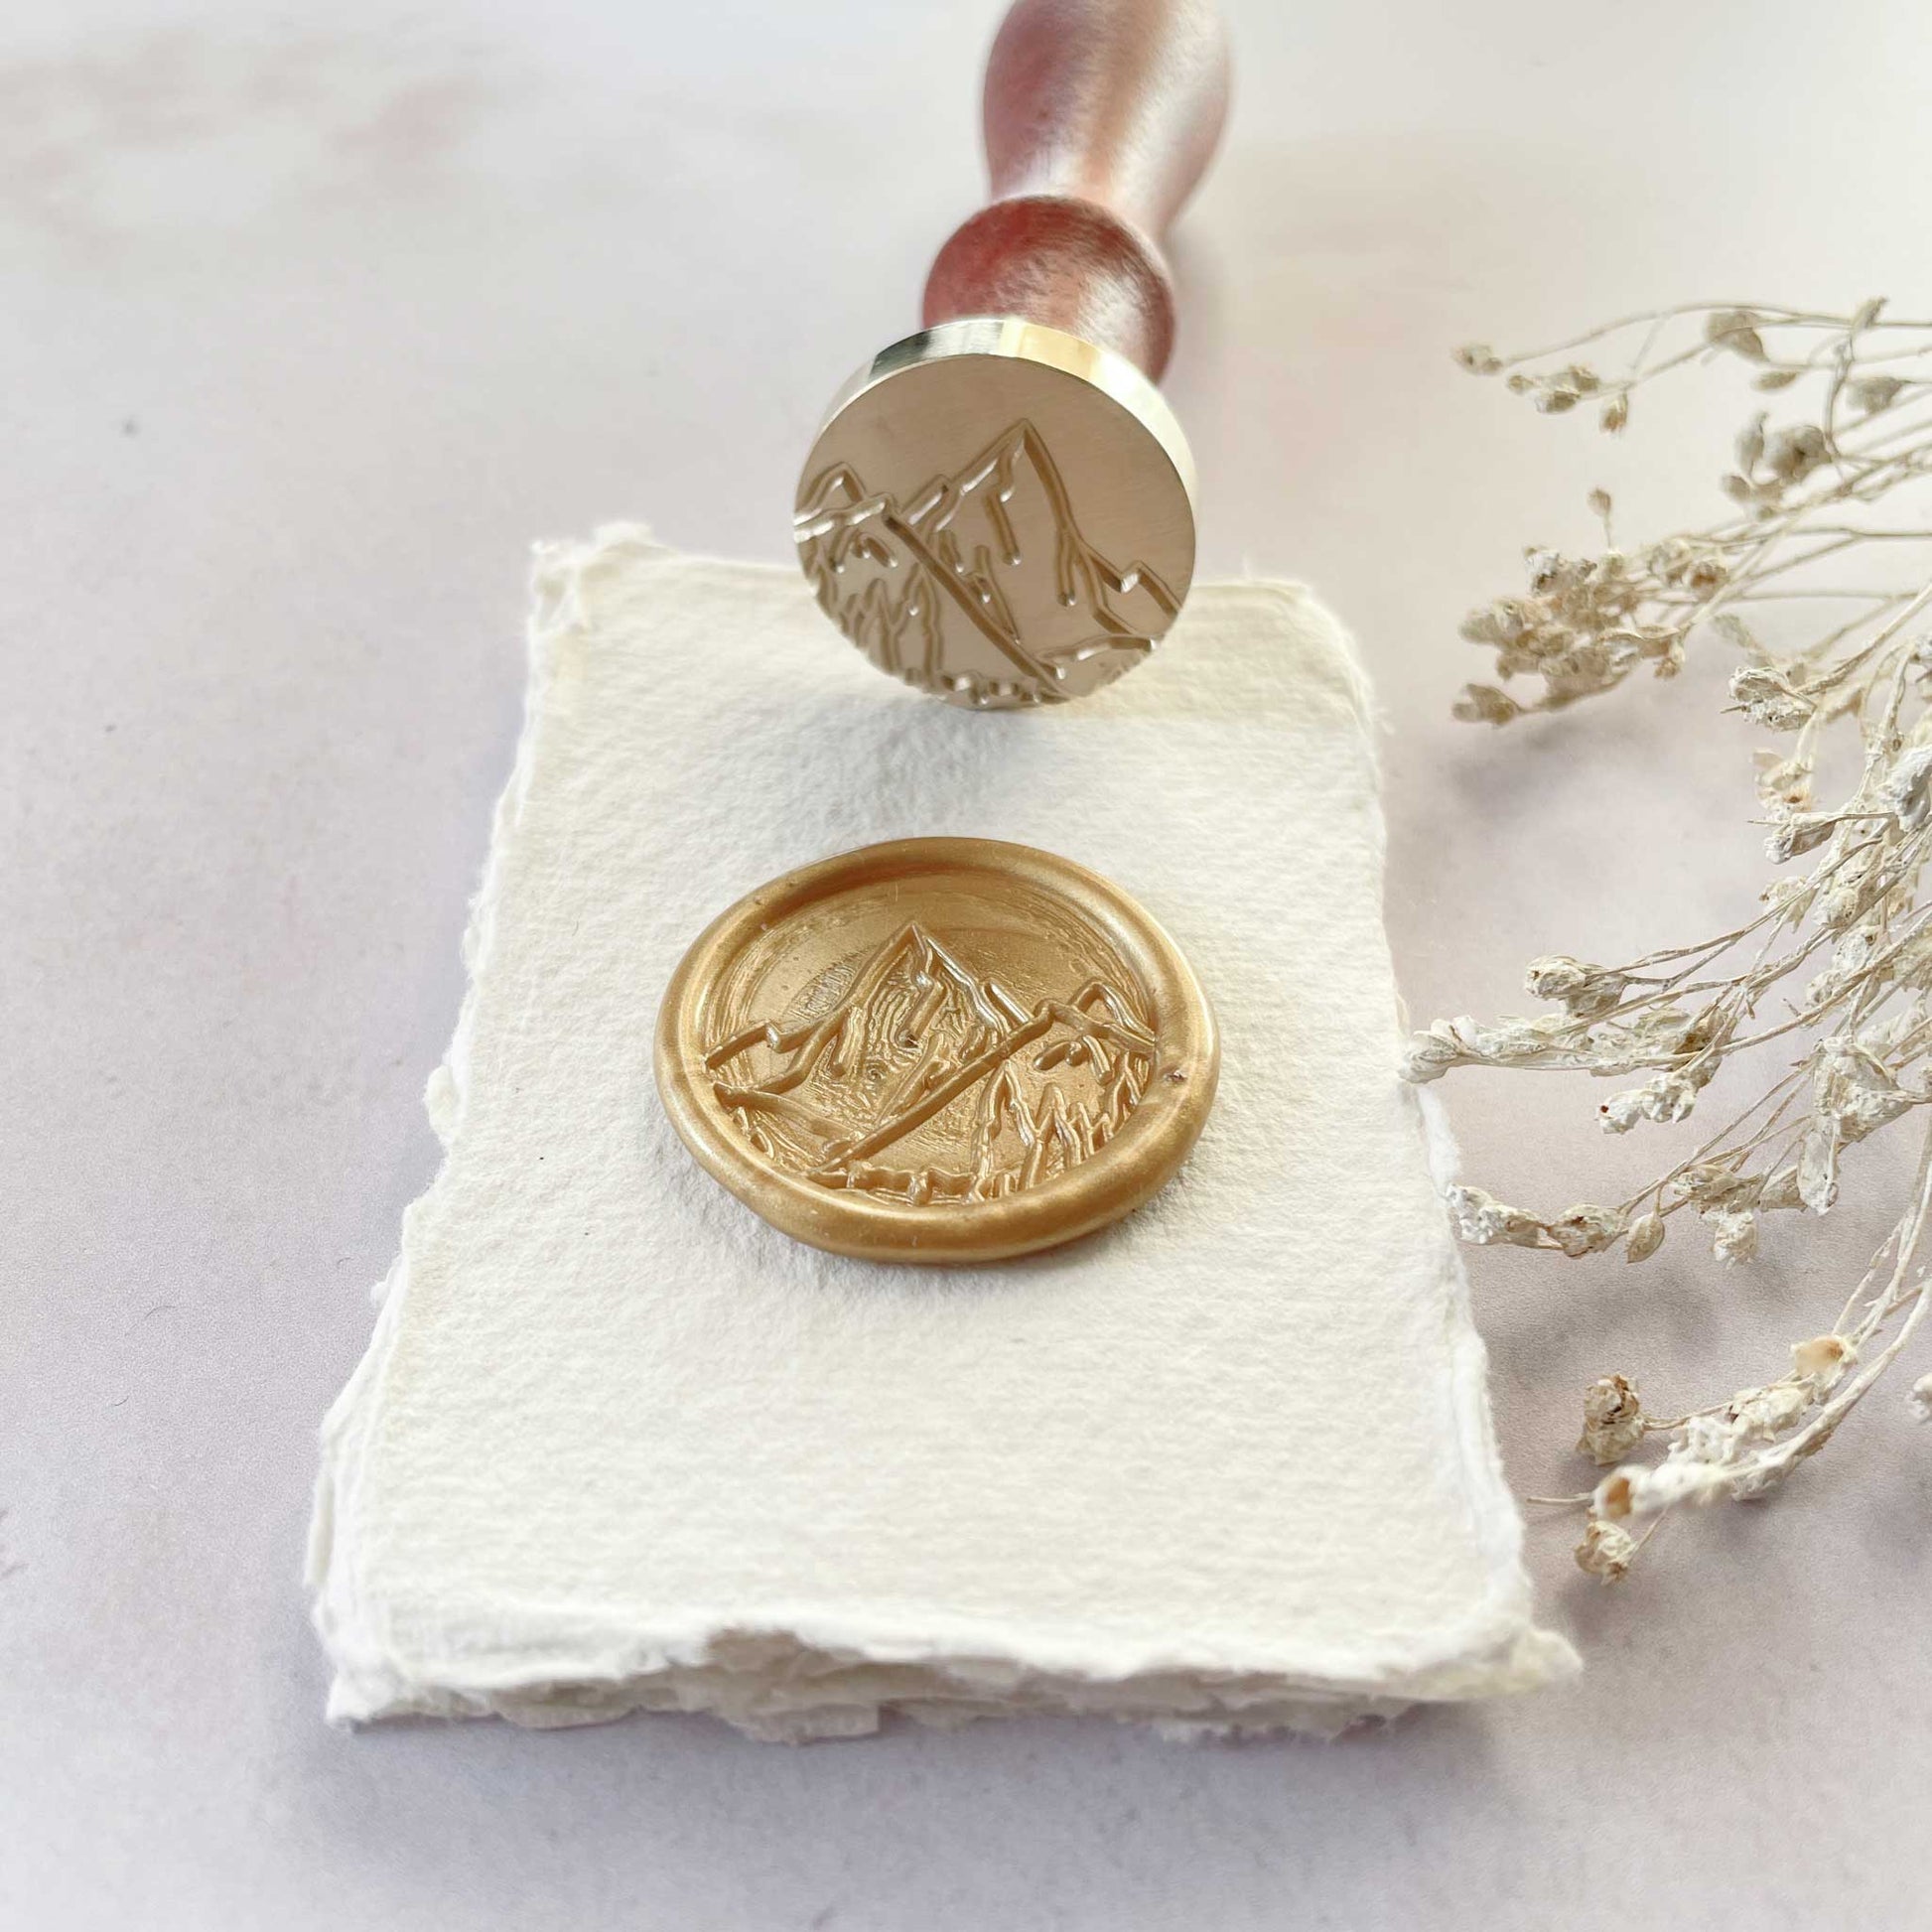 Mountain peak design wax seal.  Sealing wax stamp with an image of the alps.  By The Natural Paper Company